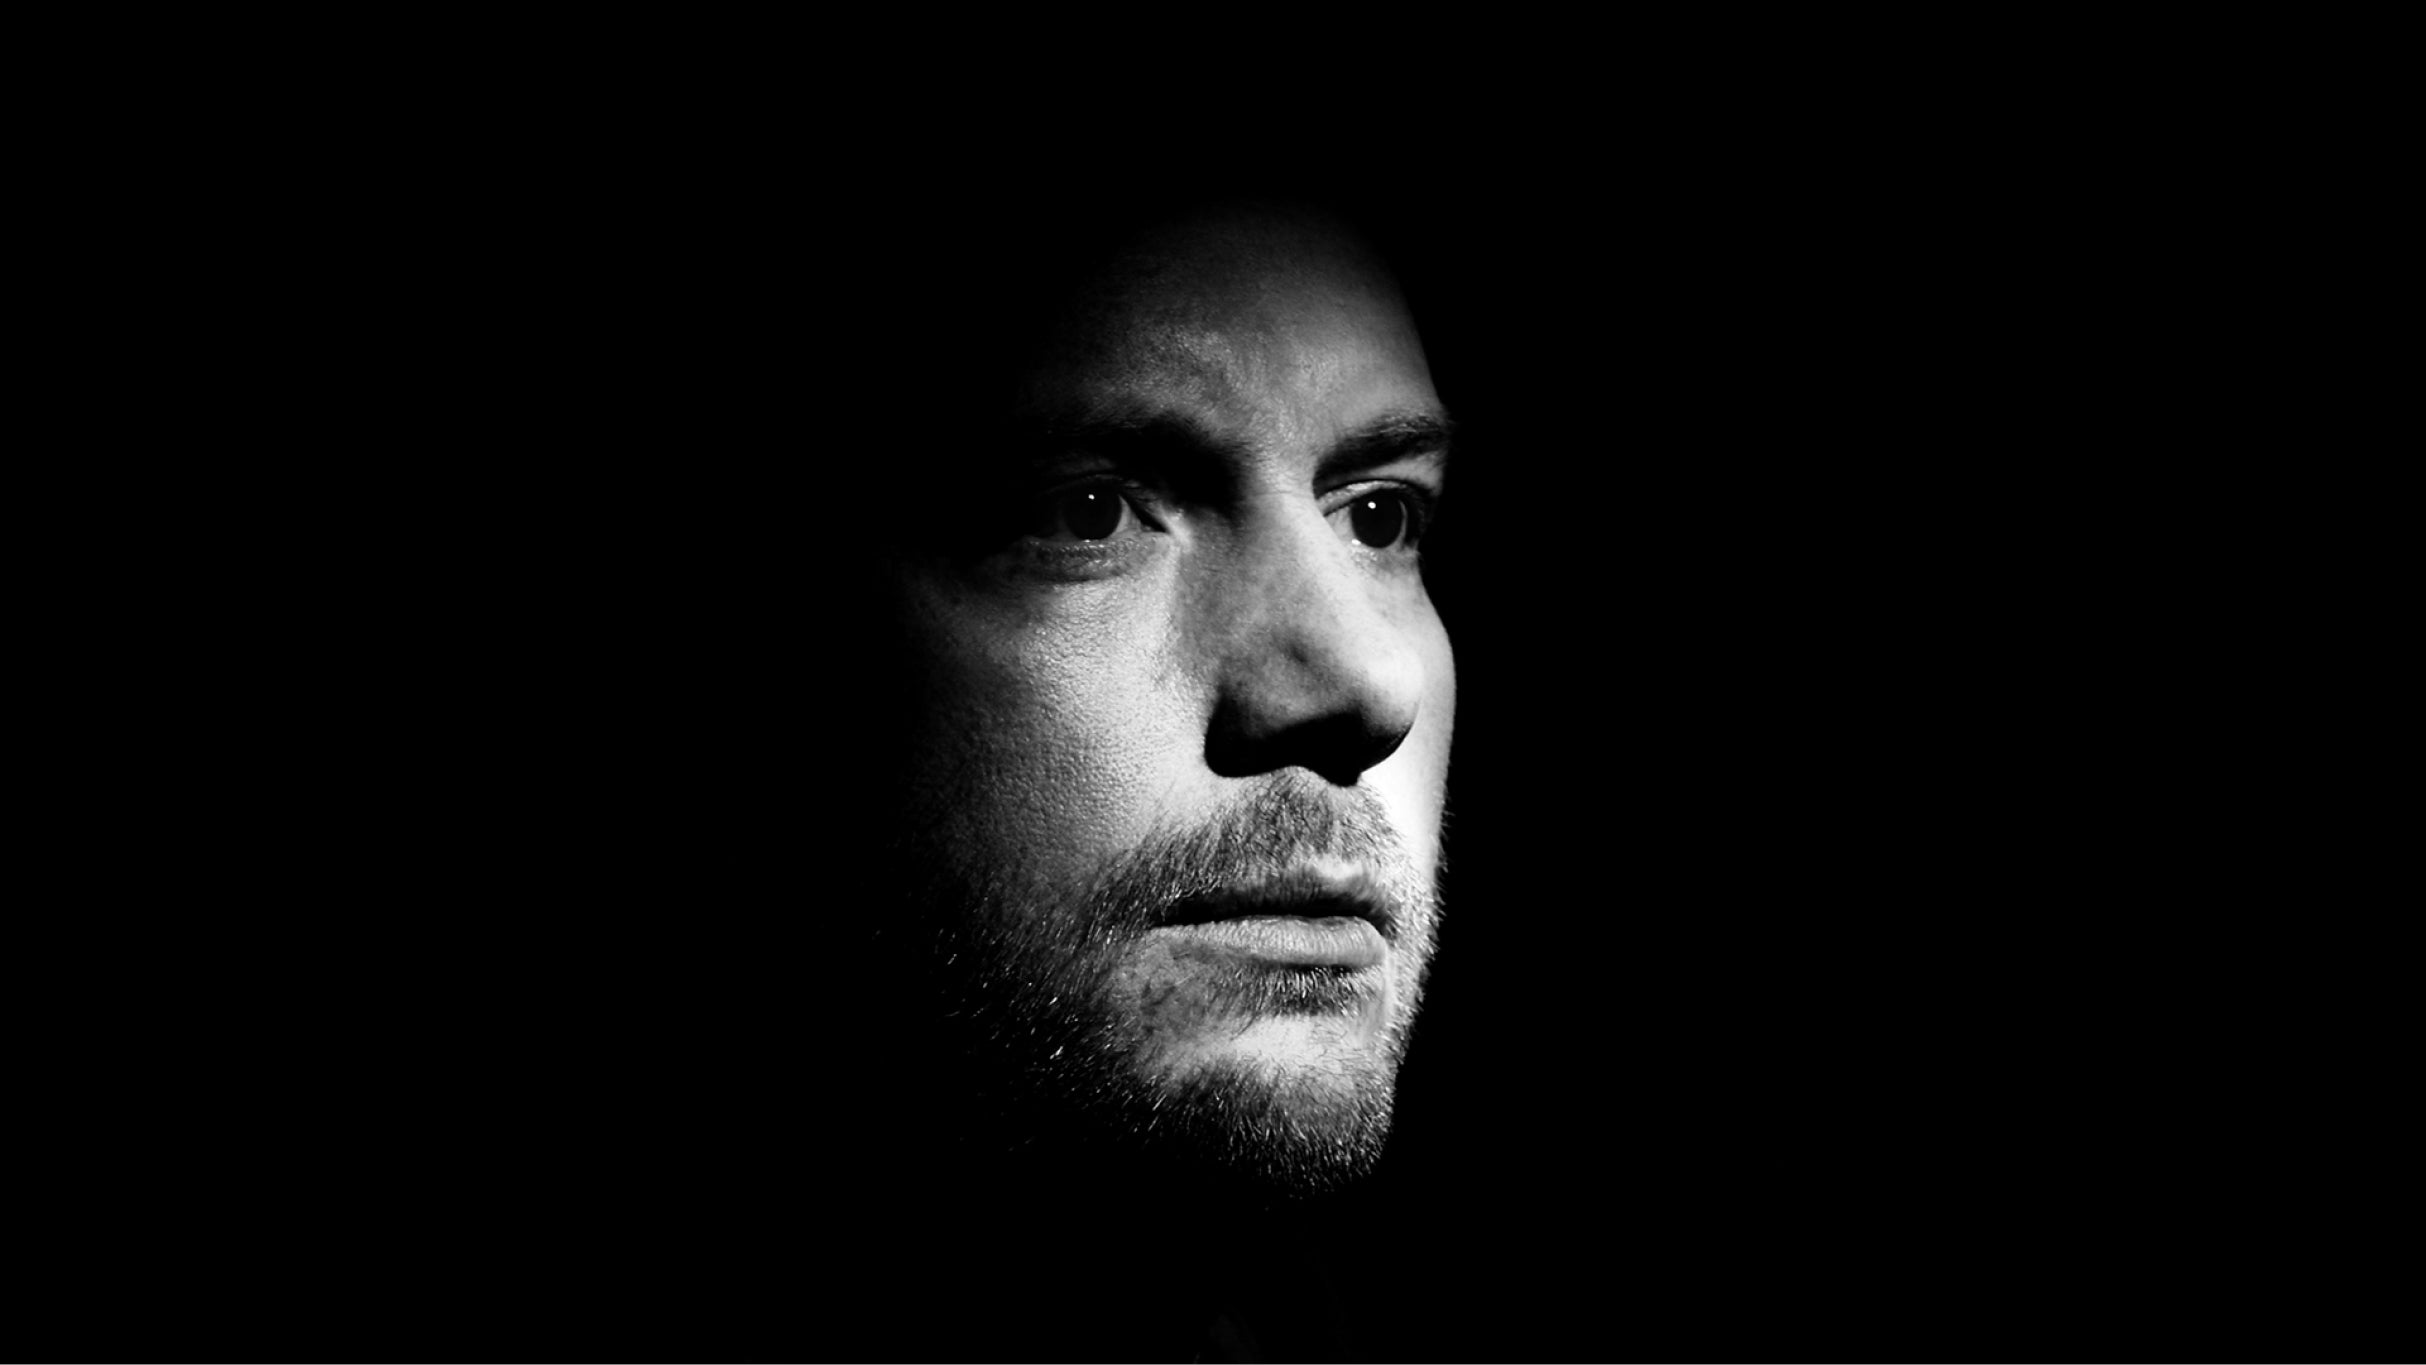 exclusive presale password for Eric Prydz face value tickets in Cardiff at Cardiff Castle